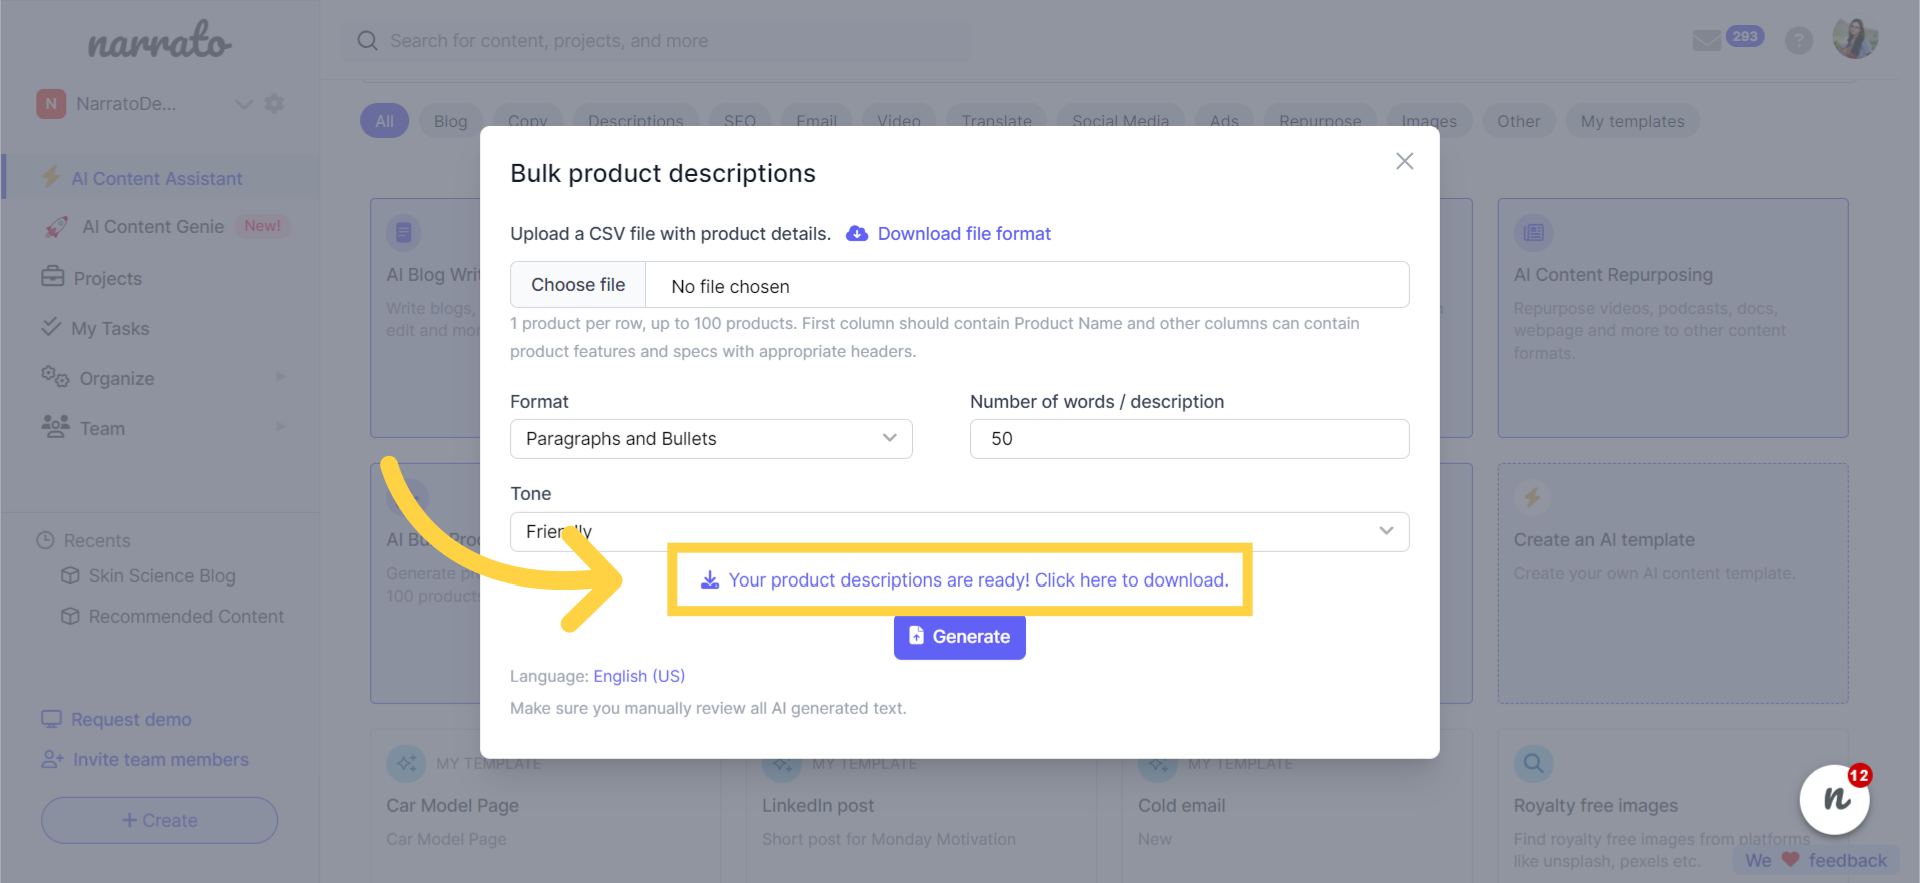 Download the AI-generated product descriptions in a downloadable sheet